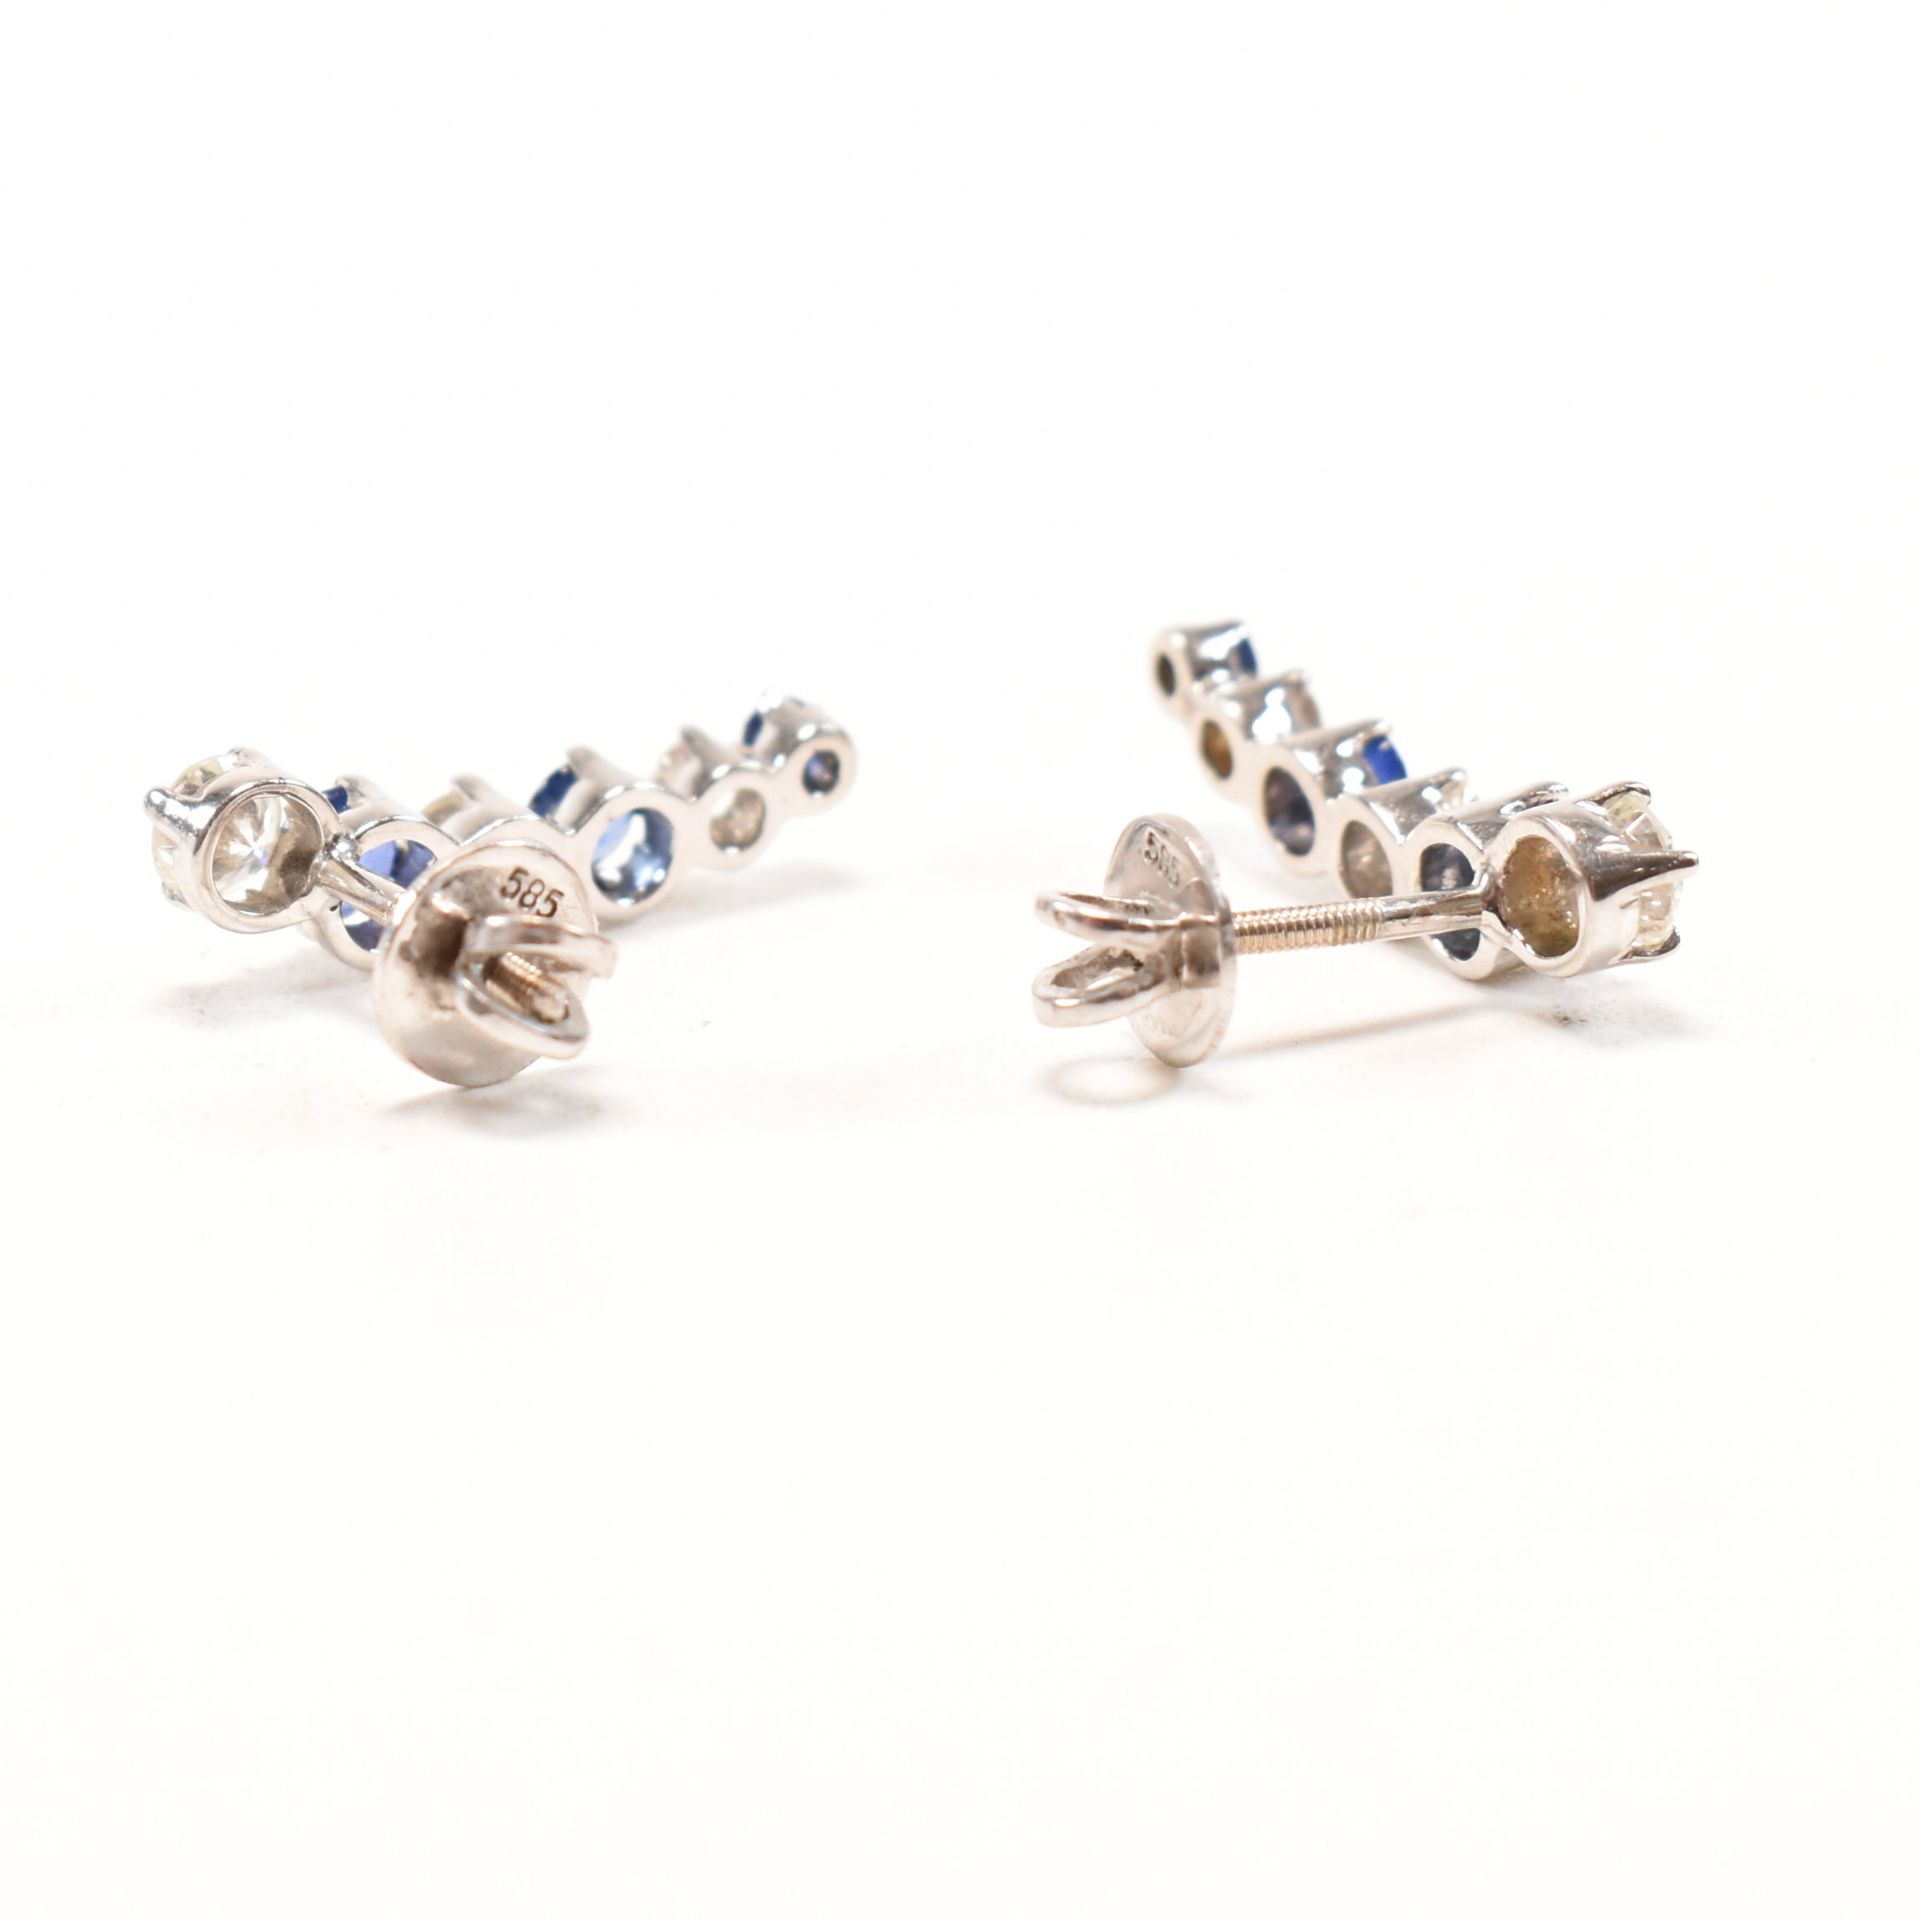 PAIR OF 14CT WHITE GOLD SAPPHIRE & DIAMOND EARRINGS - Image 8 of 8